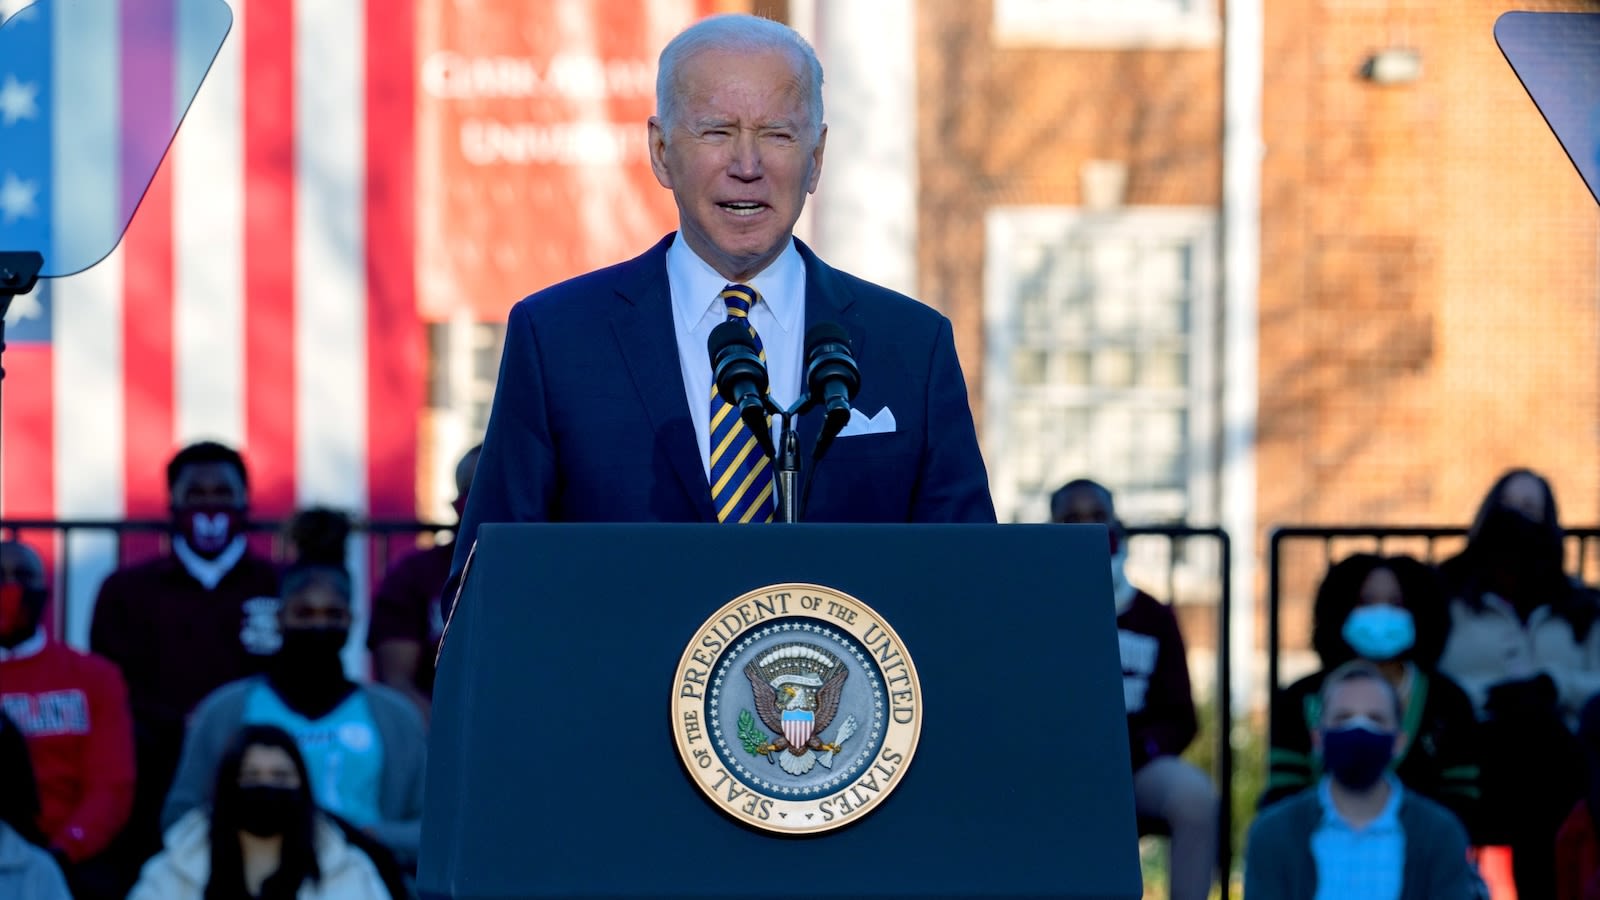 Morehouse College not rescinding Biden's commencement invitation amid some Israel criticism